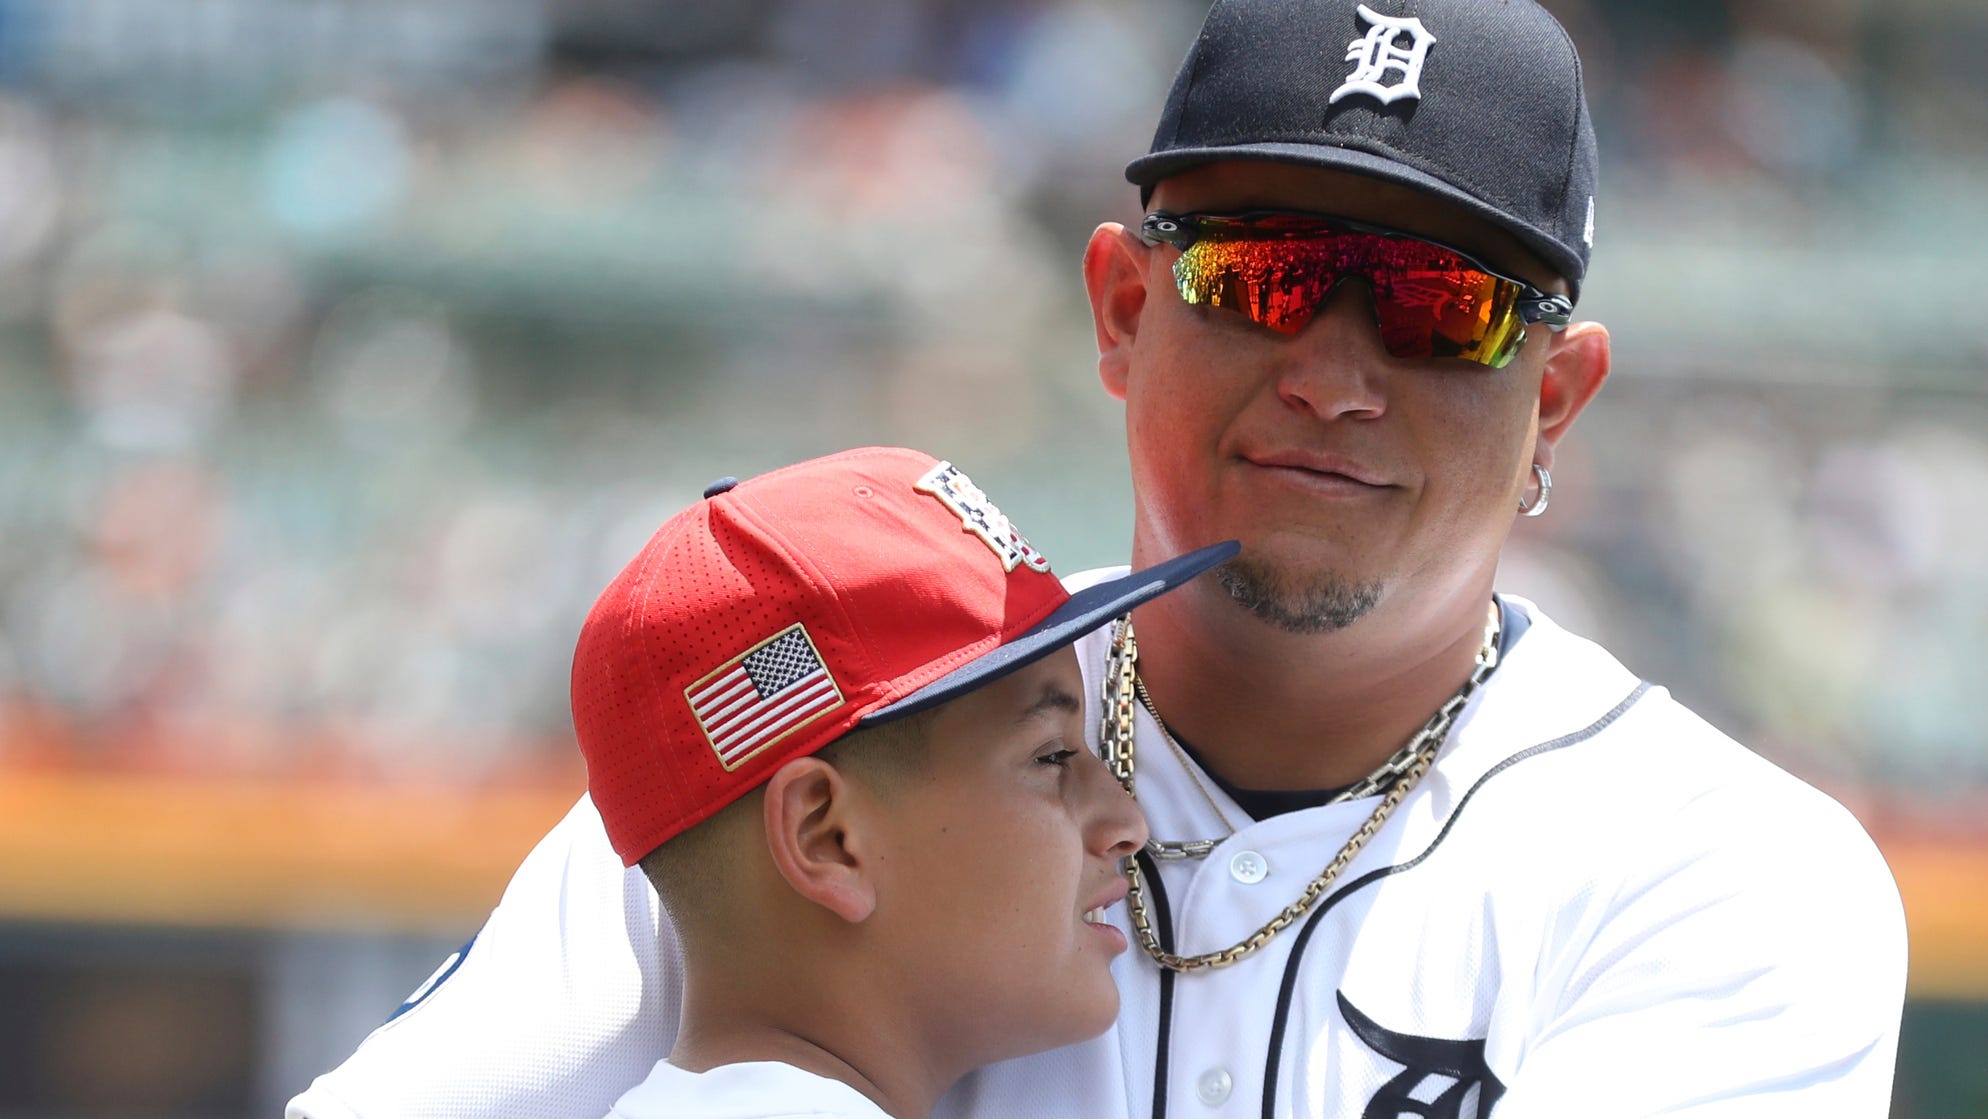 Detroit Tigers DH Miguel Cabrera (24) was honored for his 3,000 hits and 500 homers before the game against the Toronto Blue Jays on Sunday, June 12, 2022. Cabrera embraces his son, Christopher, after the ceremony.